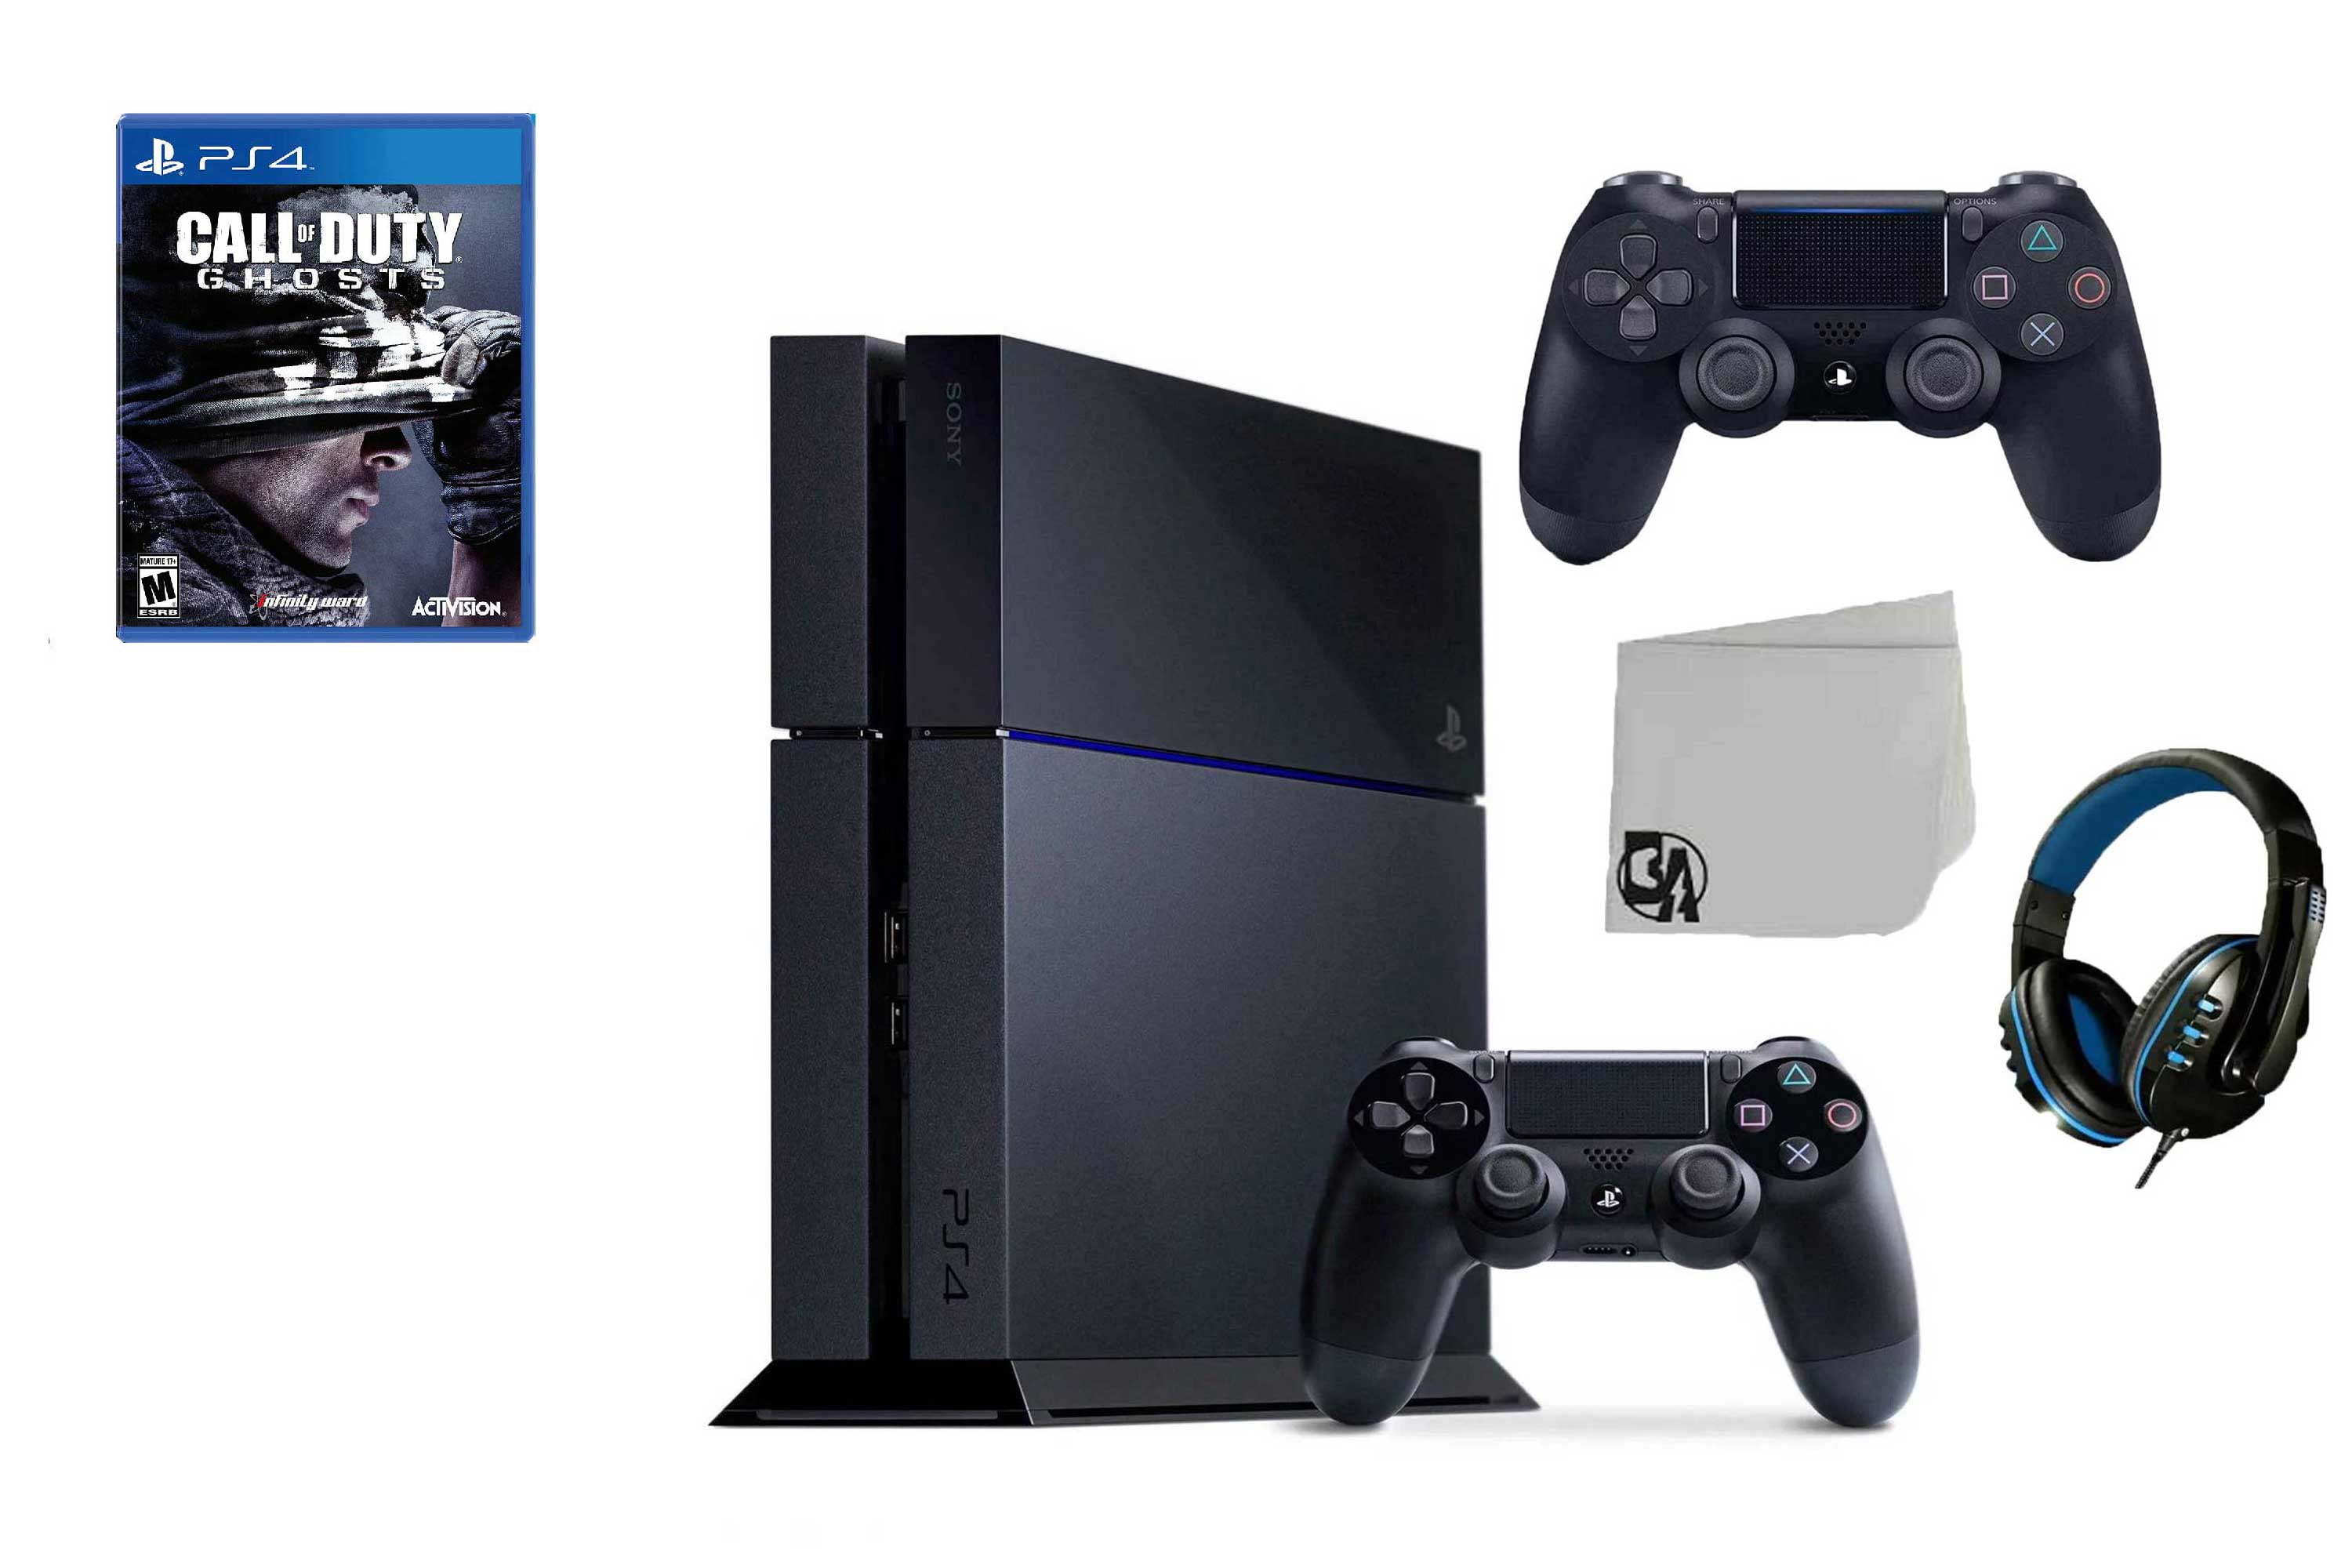 oversætter tiggeri Tumult Sony PlayStation 4 500GB Gaming Console Black 2 Controller Included with  Spider-Man BOLT AXTION Bundle Like New - Walmart.com